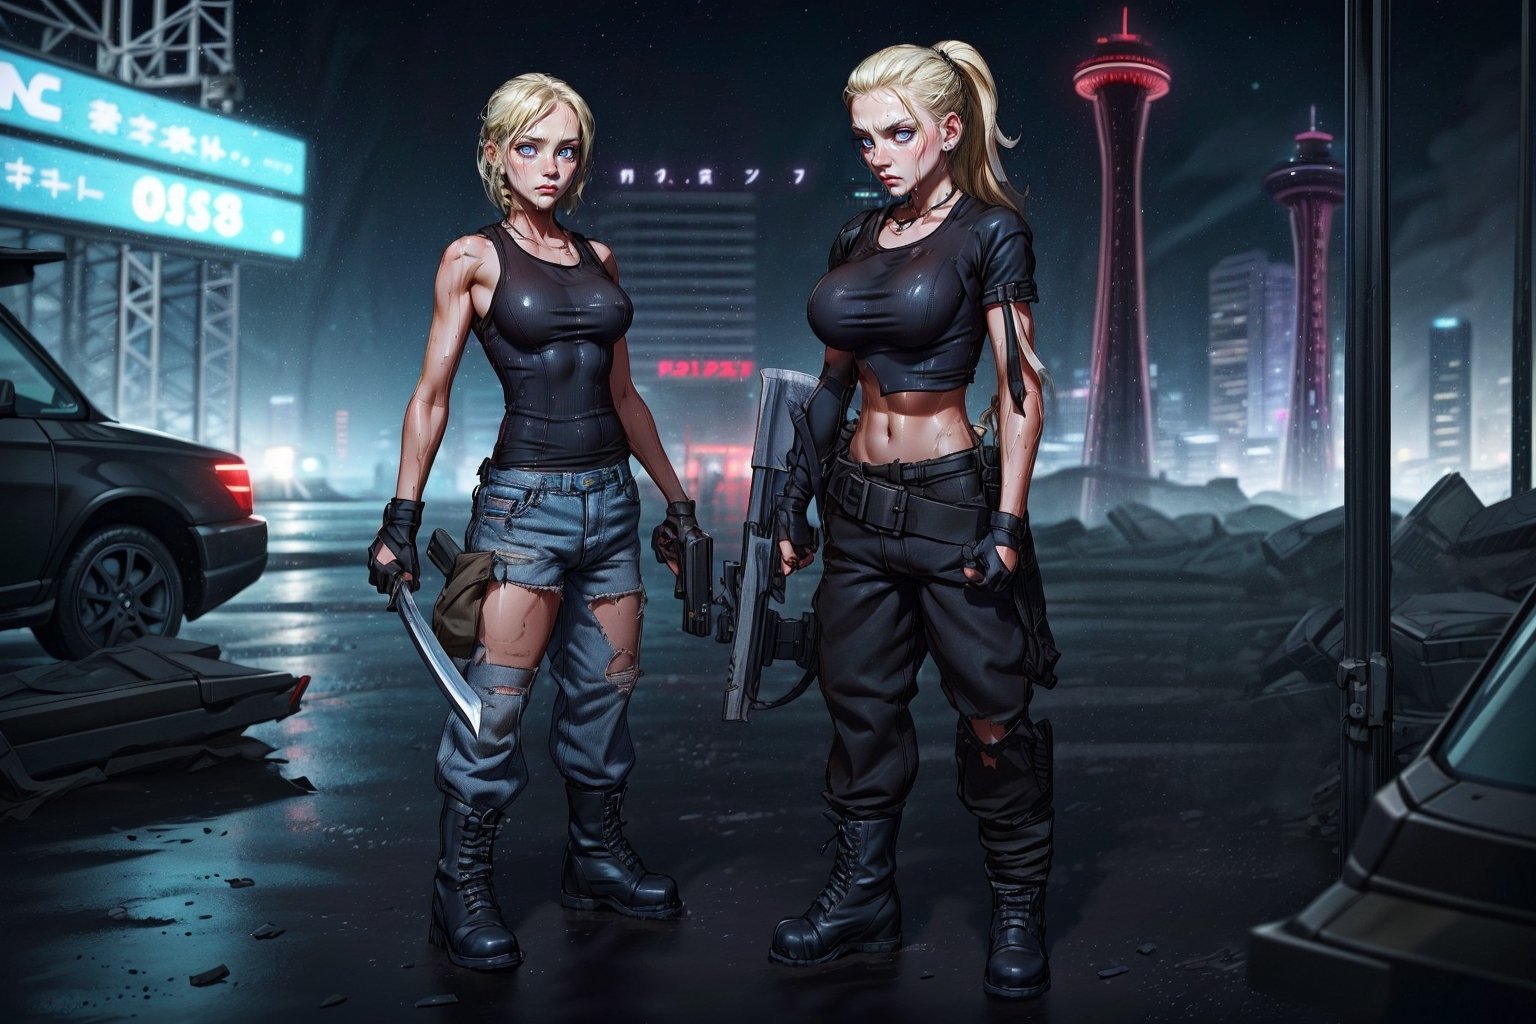 angry two_female, blonde hair dark hair, black combat boots, ripped jeans, black tshirt white tanktop, holding a machette, holding gunsl, walking through a post apocolyptic seattle, wet ground, blurred space needle in the background, Young beauty spirit ,photo of perfecteyes eyes,JeeSoo ,